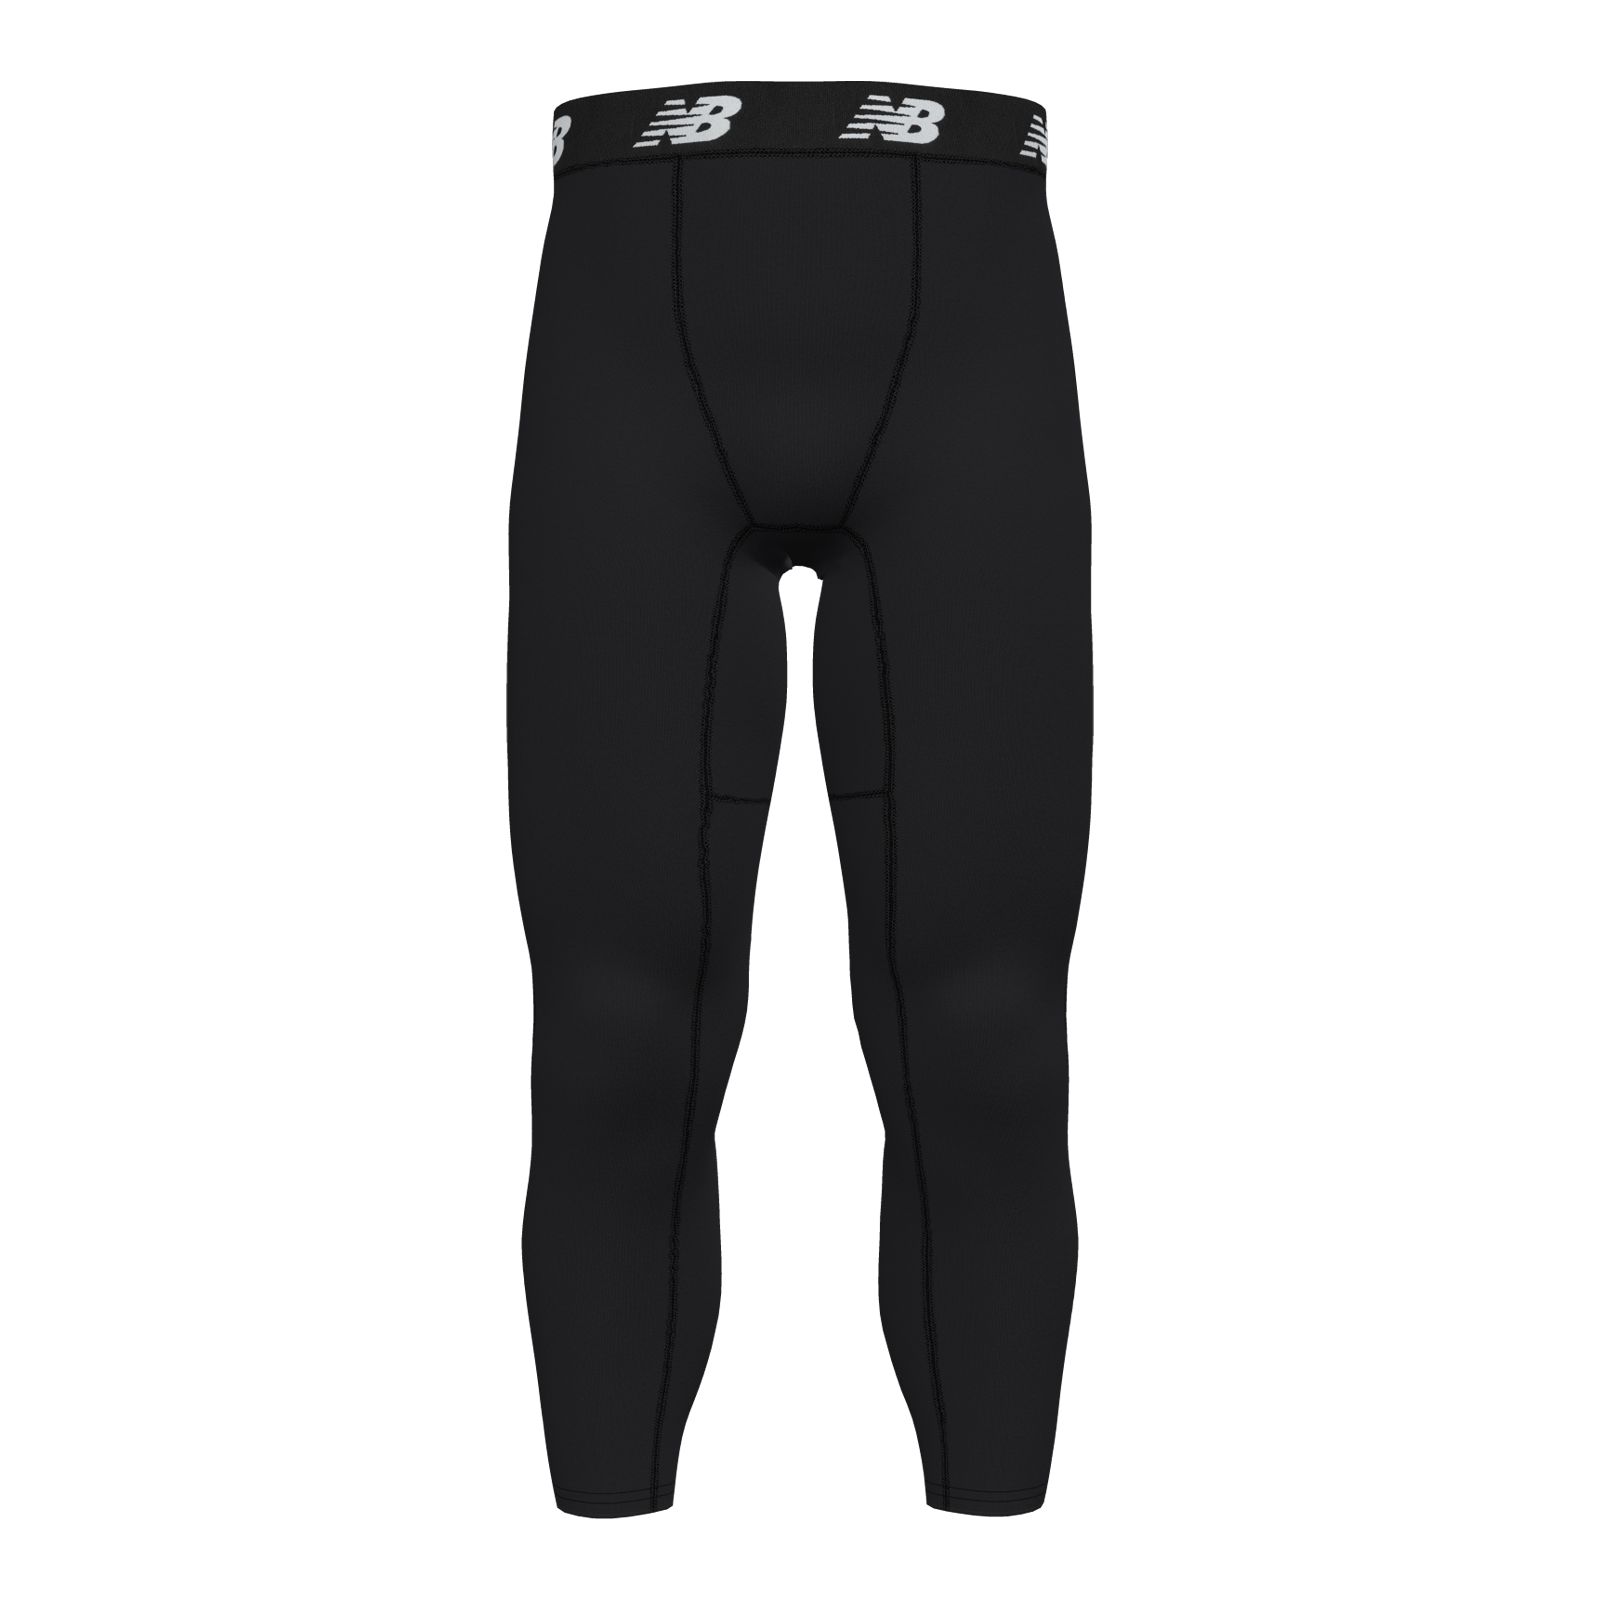 UNDER ARMOR Compression Leggings / Black & Gray Sporty-Look / Size Large